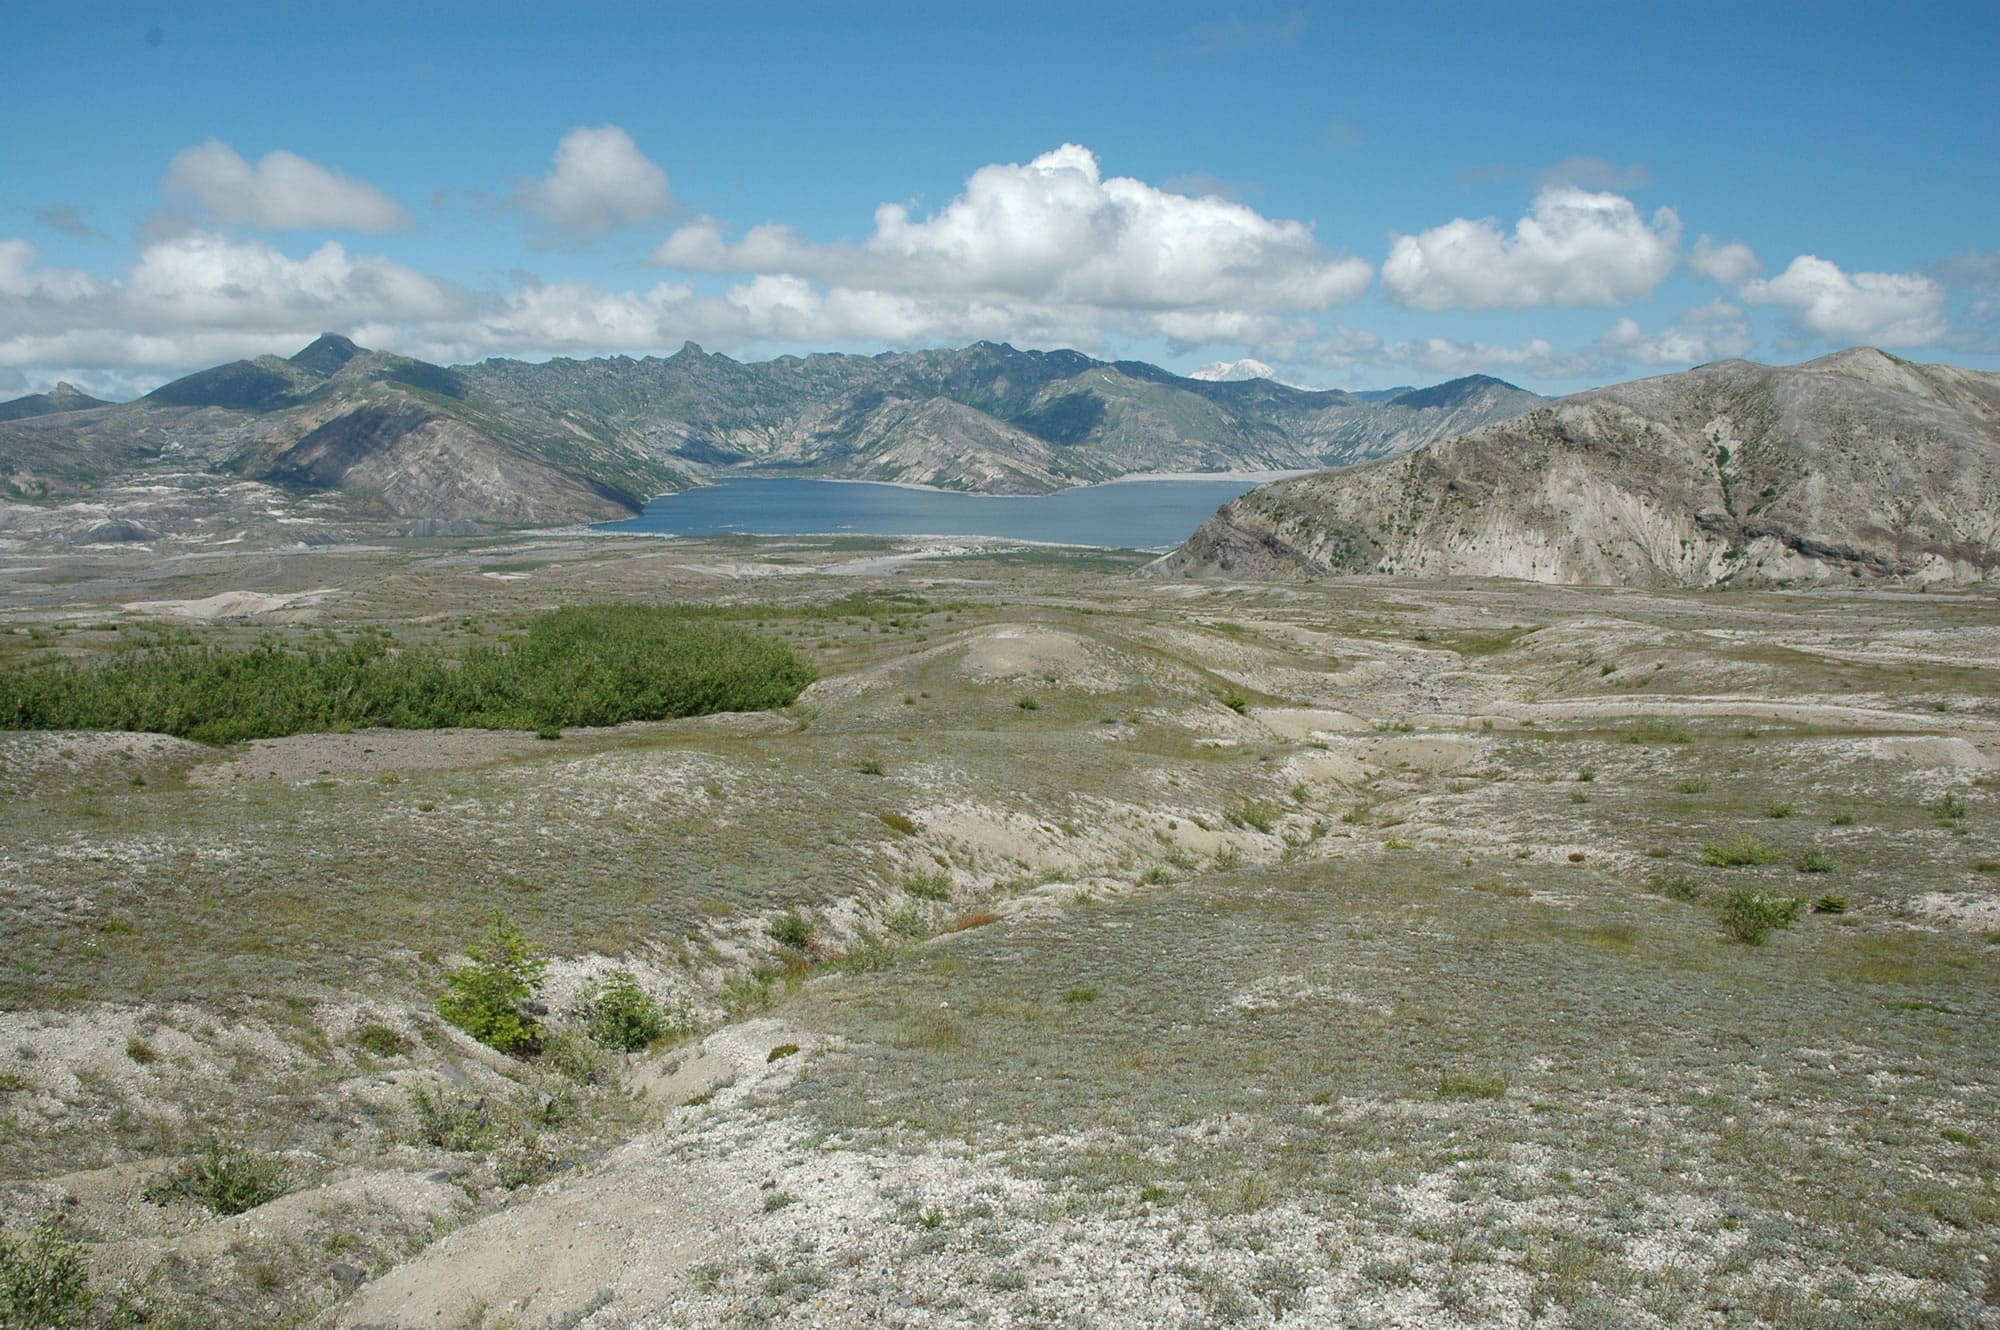 A view of the Spirit Lake pumice plain from Loowit trail No. 216 on the north side of Mount St. Helens.